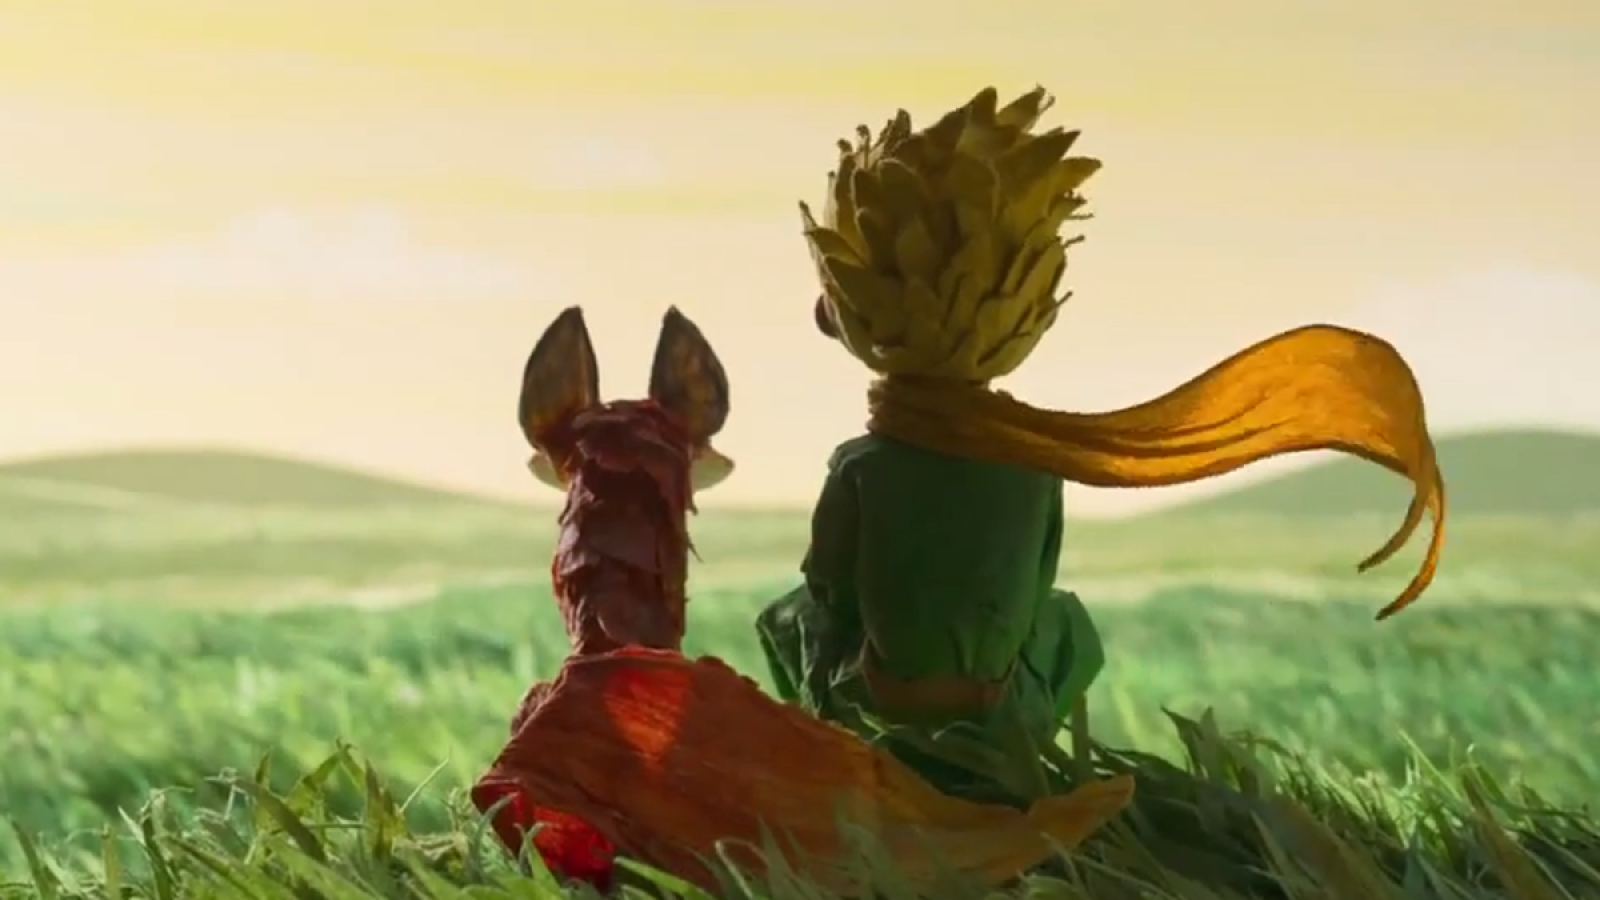 A still from 'The Little Prince', showing two characters sat down next to each other from behind.